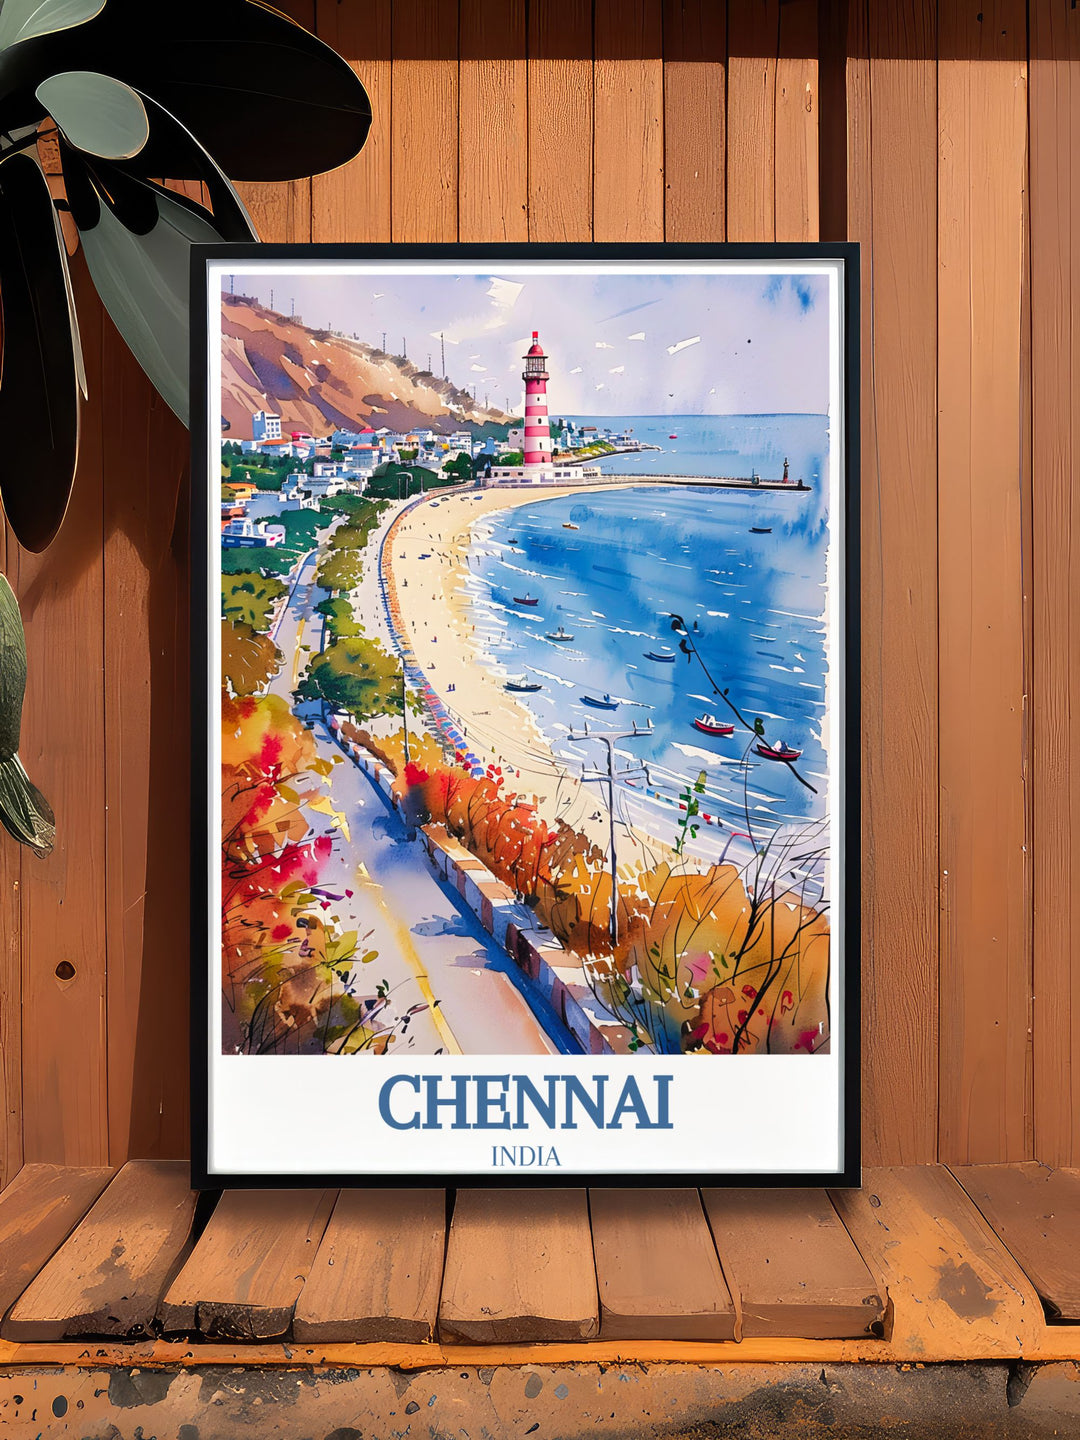 Visit the Marina Lighthouse and ascend to the top for unparalleled views of the ocean and the urban landscape of Chennai. The lighthouse offers a unique perspective on the city.